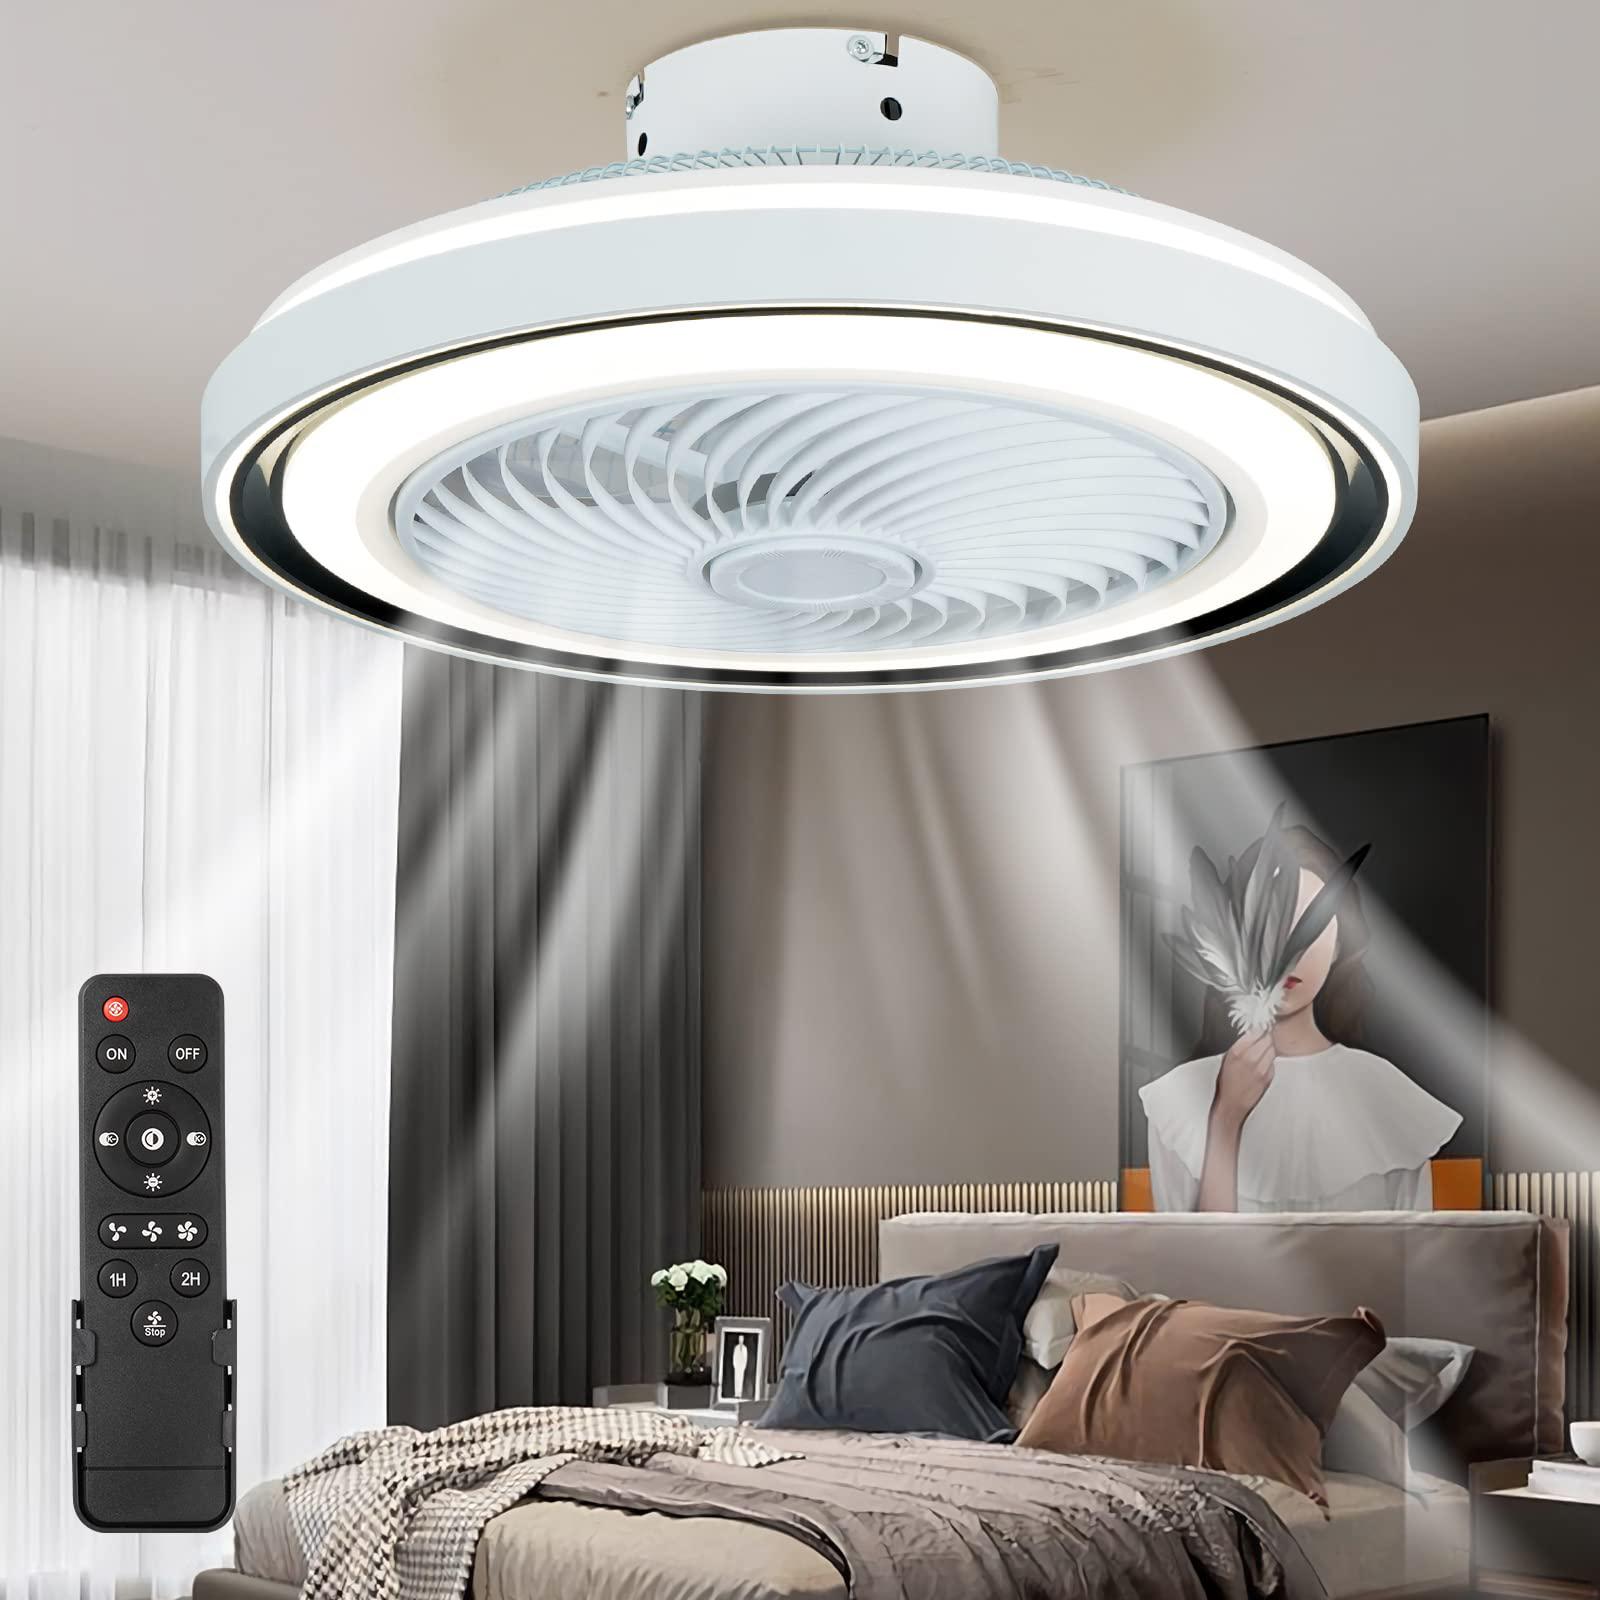 HNWZD ceiling fans with lights, 20'' modern ceiling fan with lights remote control,flush mount bladeless ceiling fan 3 lights 72w 3